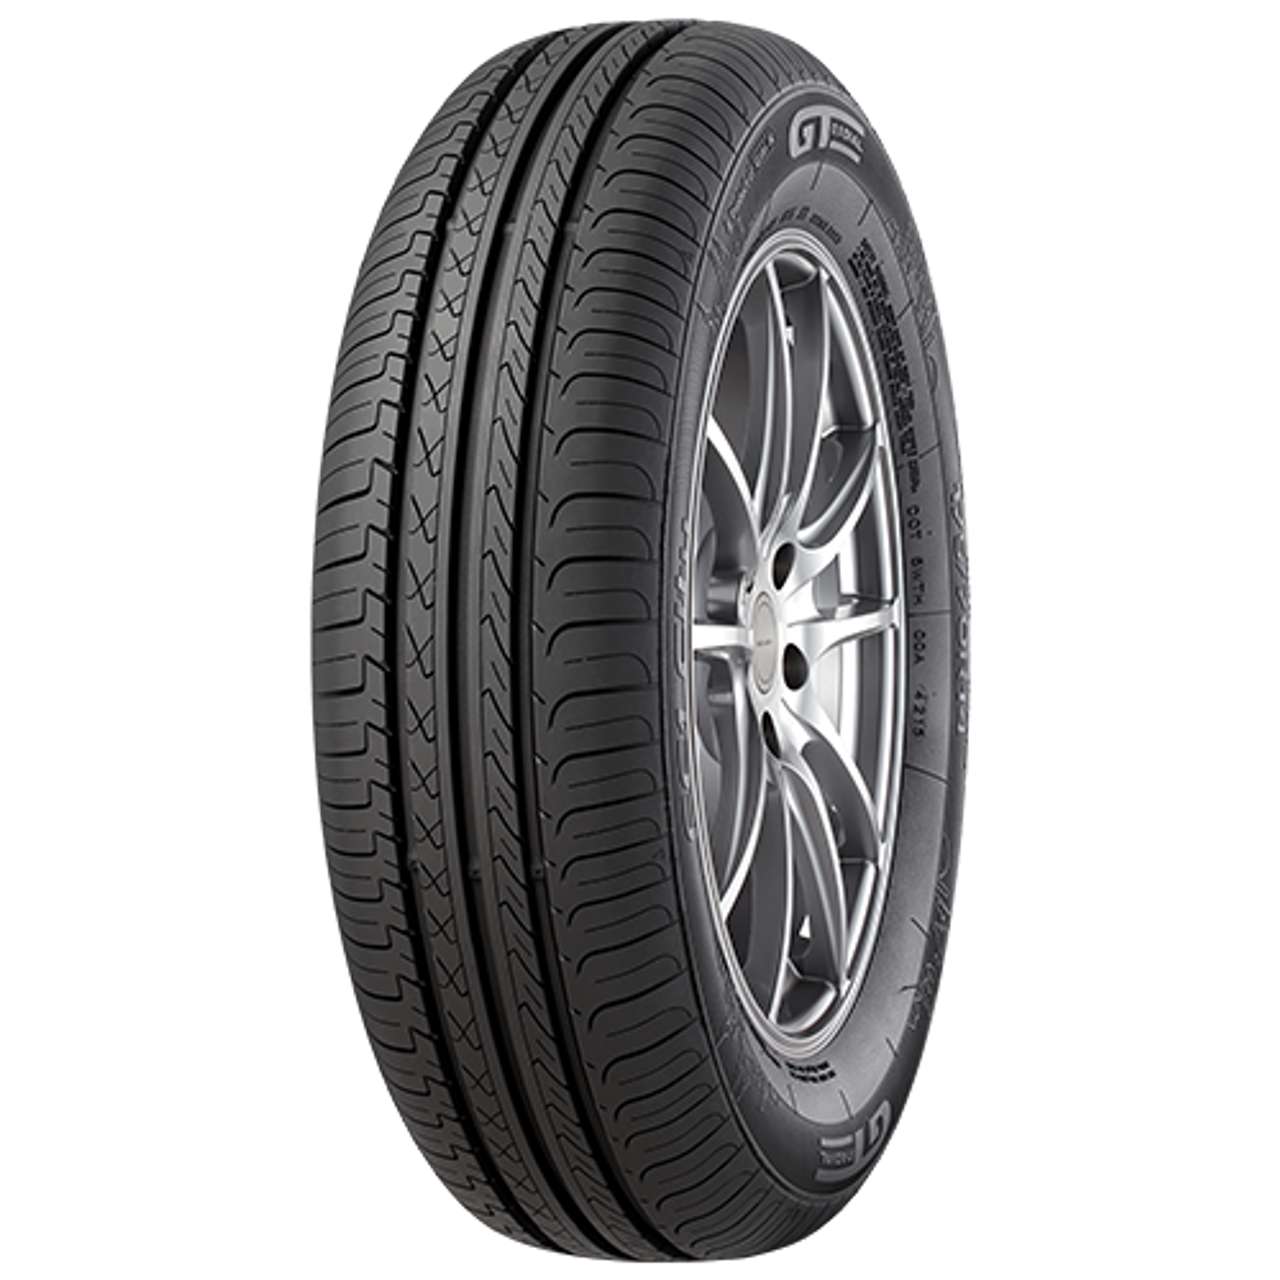 GT-RADIAL FE1 CITY 185/70R14 88H BSW